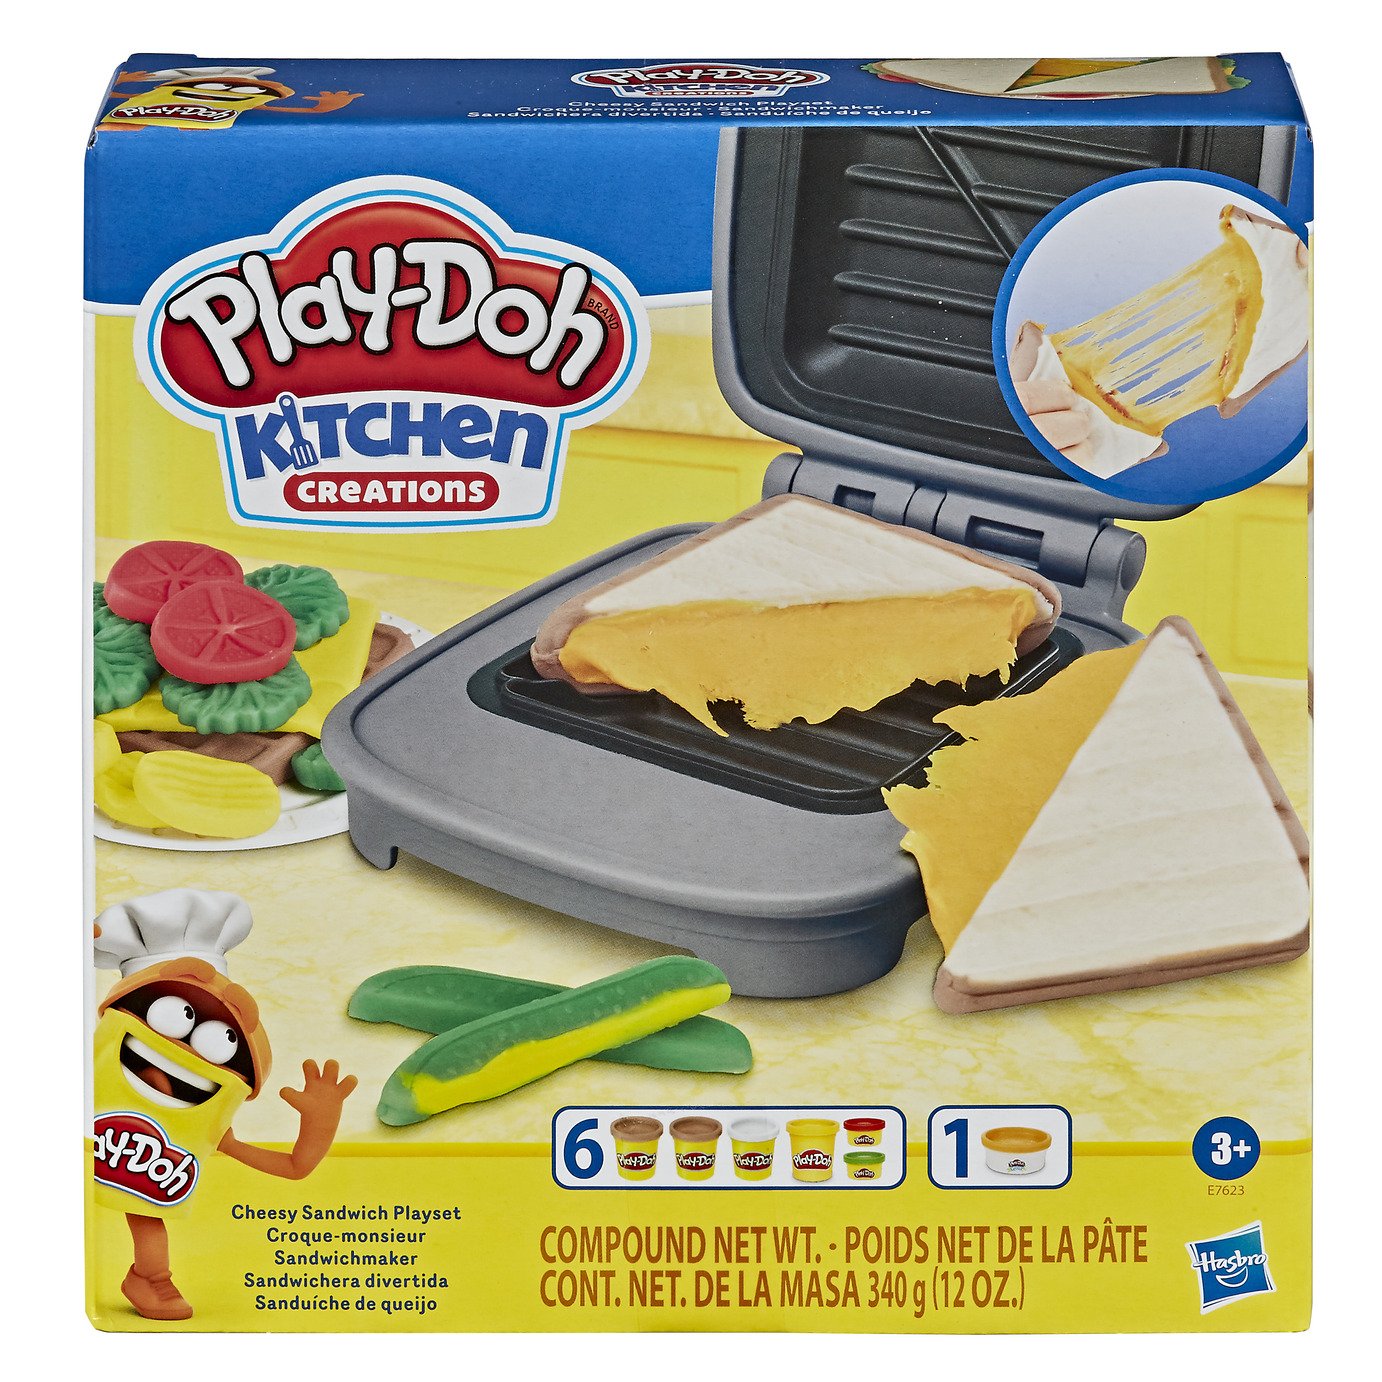 Play-Doh Kitchen Creations Cheesy Sandwich Playset Review